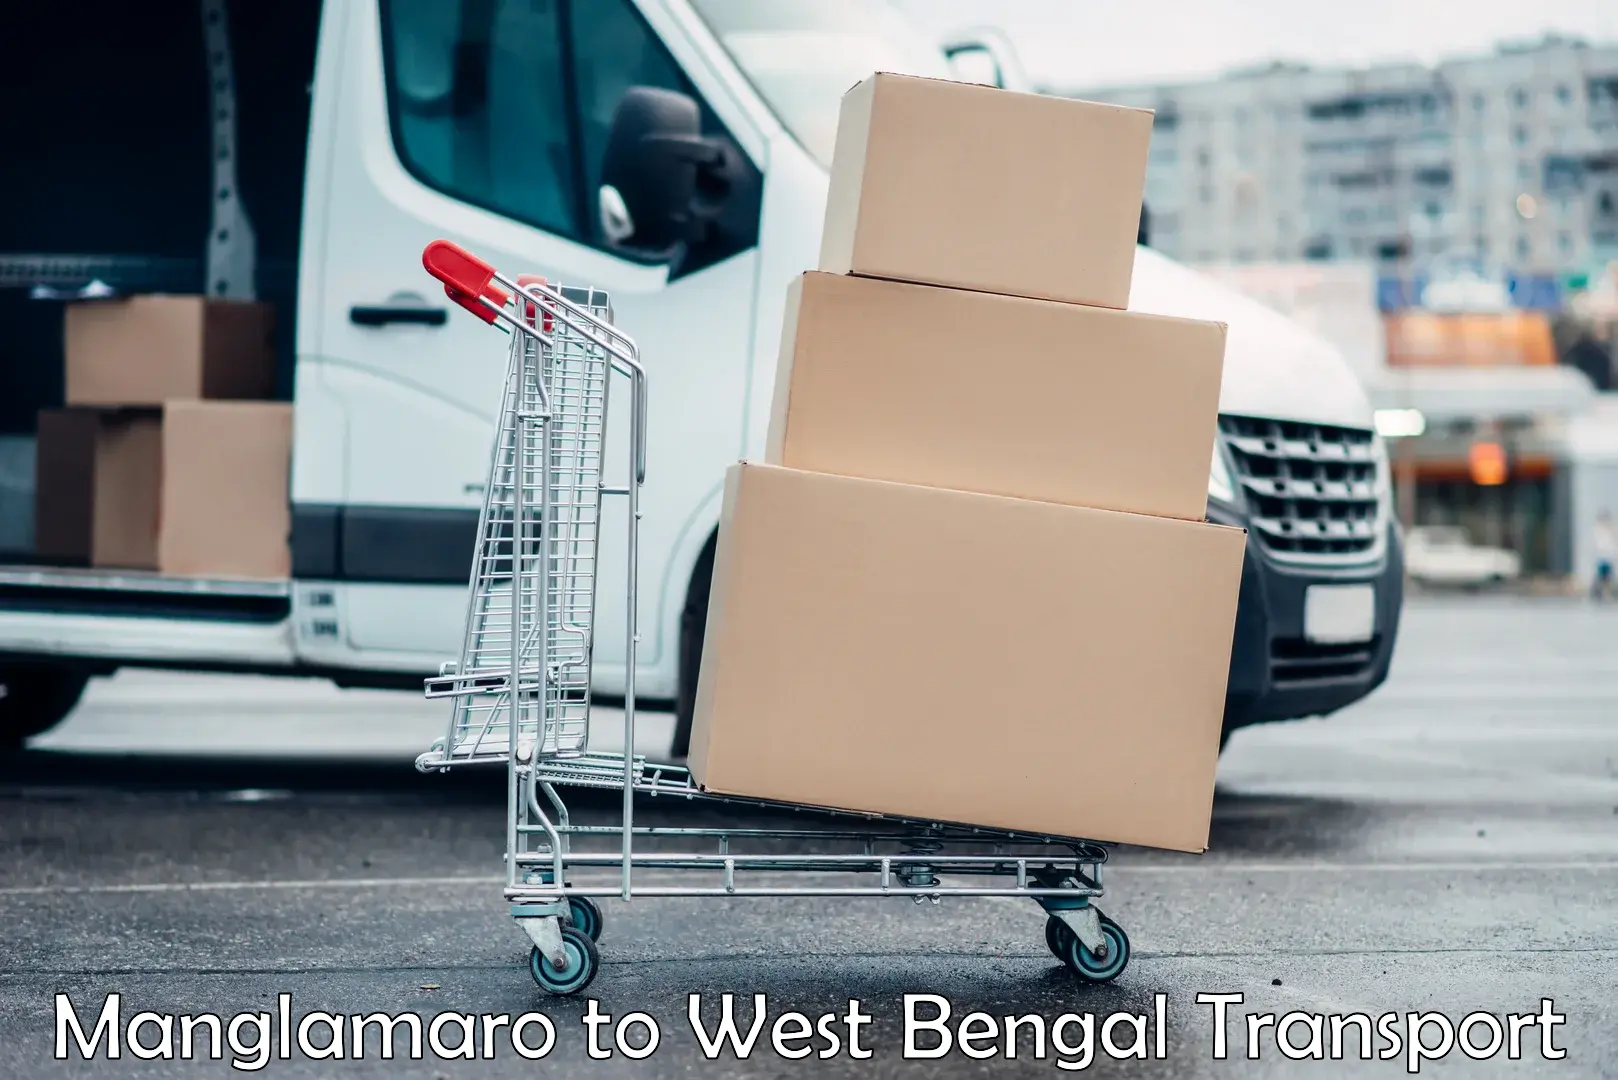 Delivery service Manglamaro to Islampur